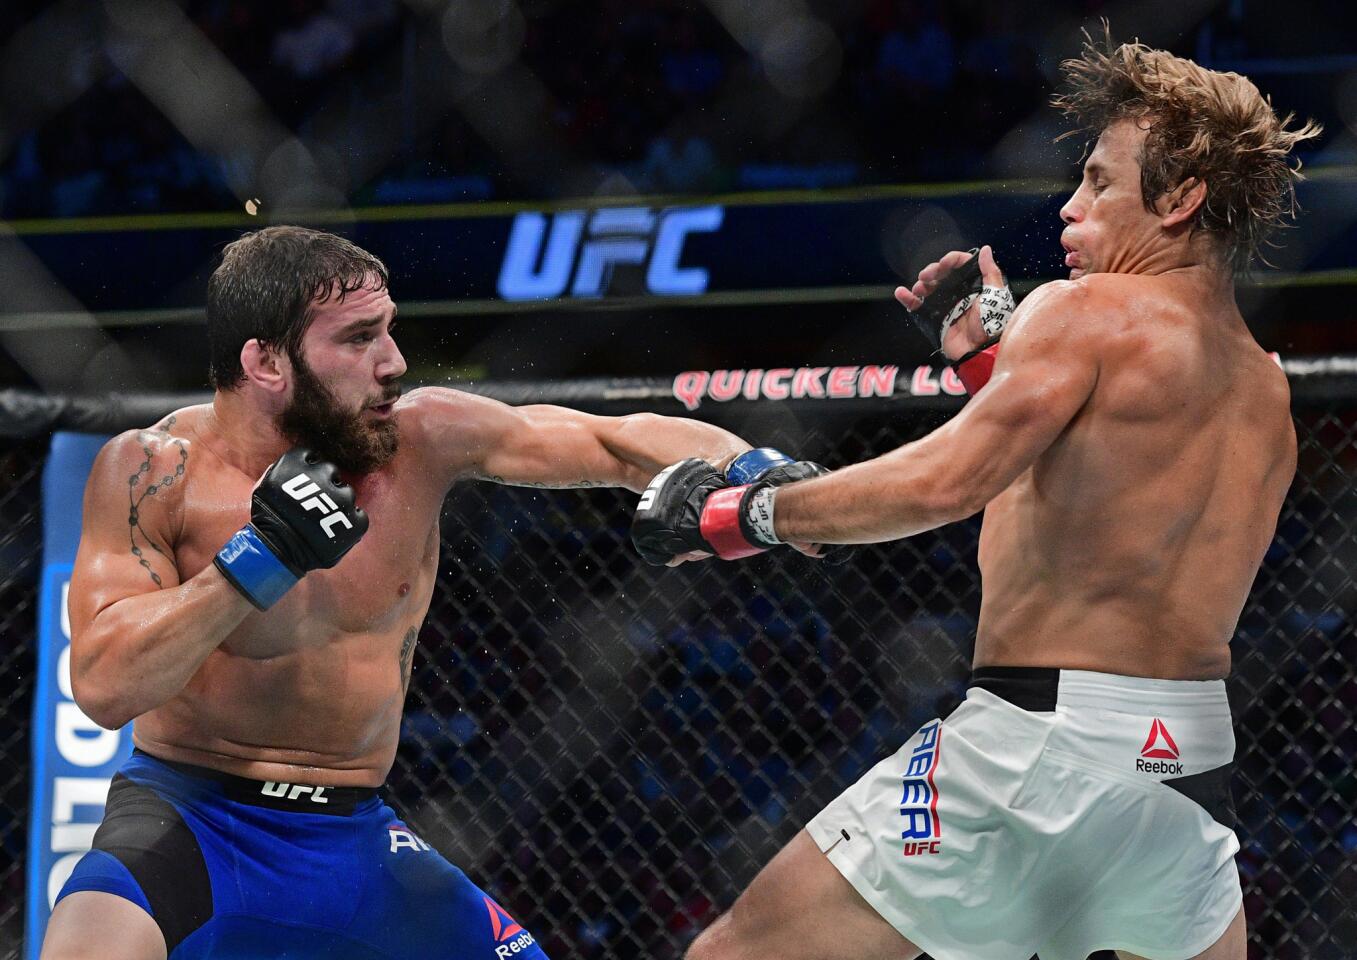 Jimmie Rivera, left, beat Urijah Faber by decision Sept. 10 at UFC 203 in Cleveland.